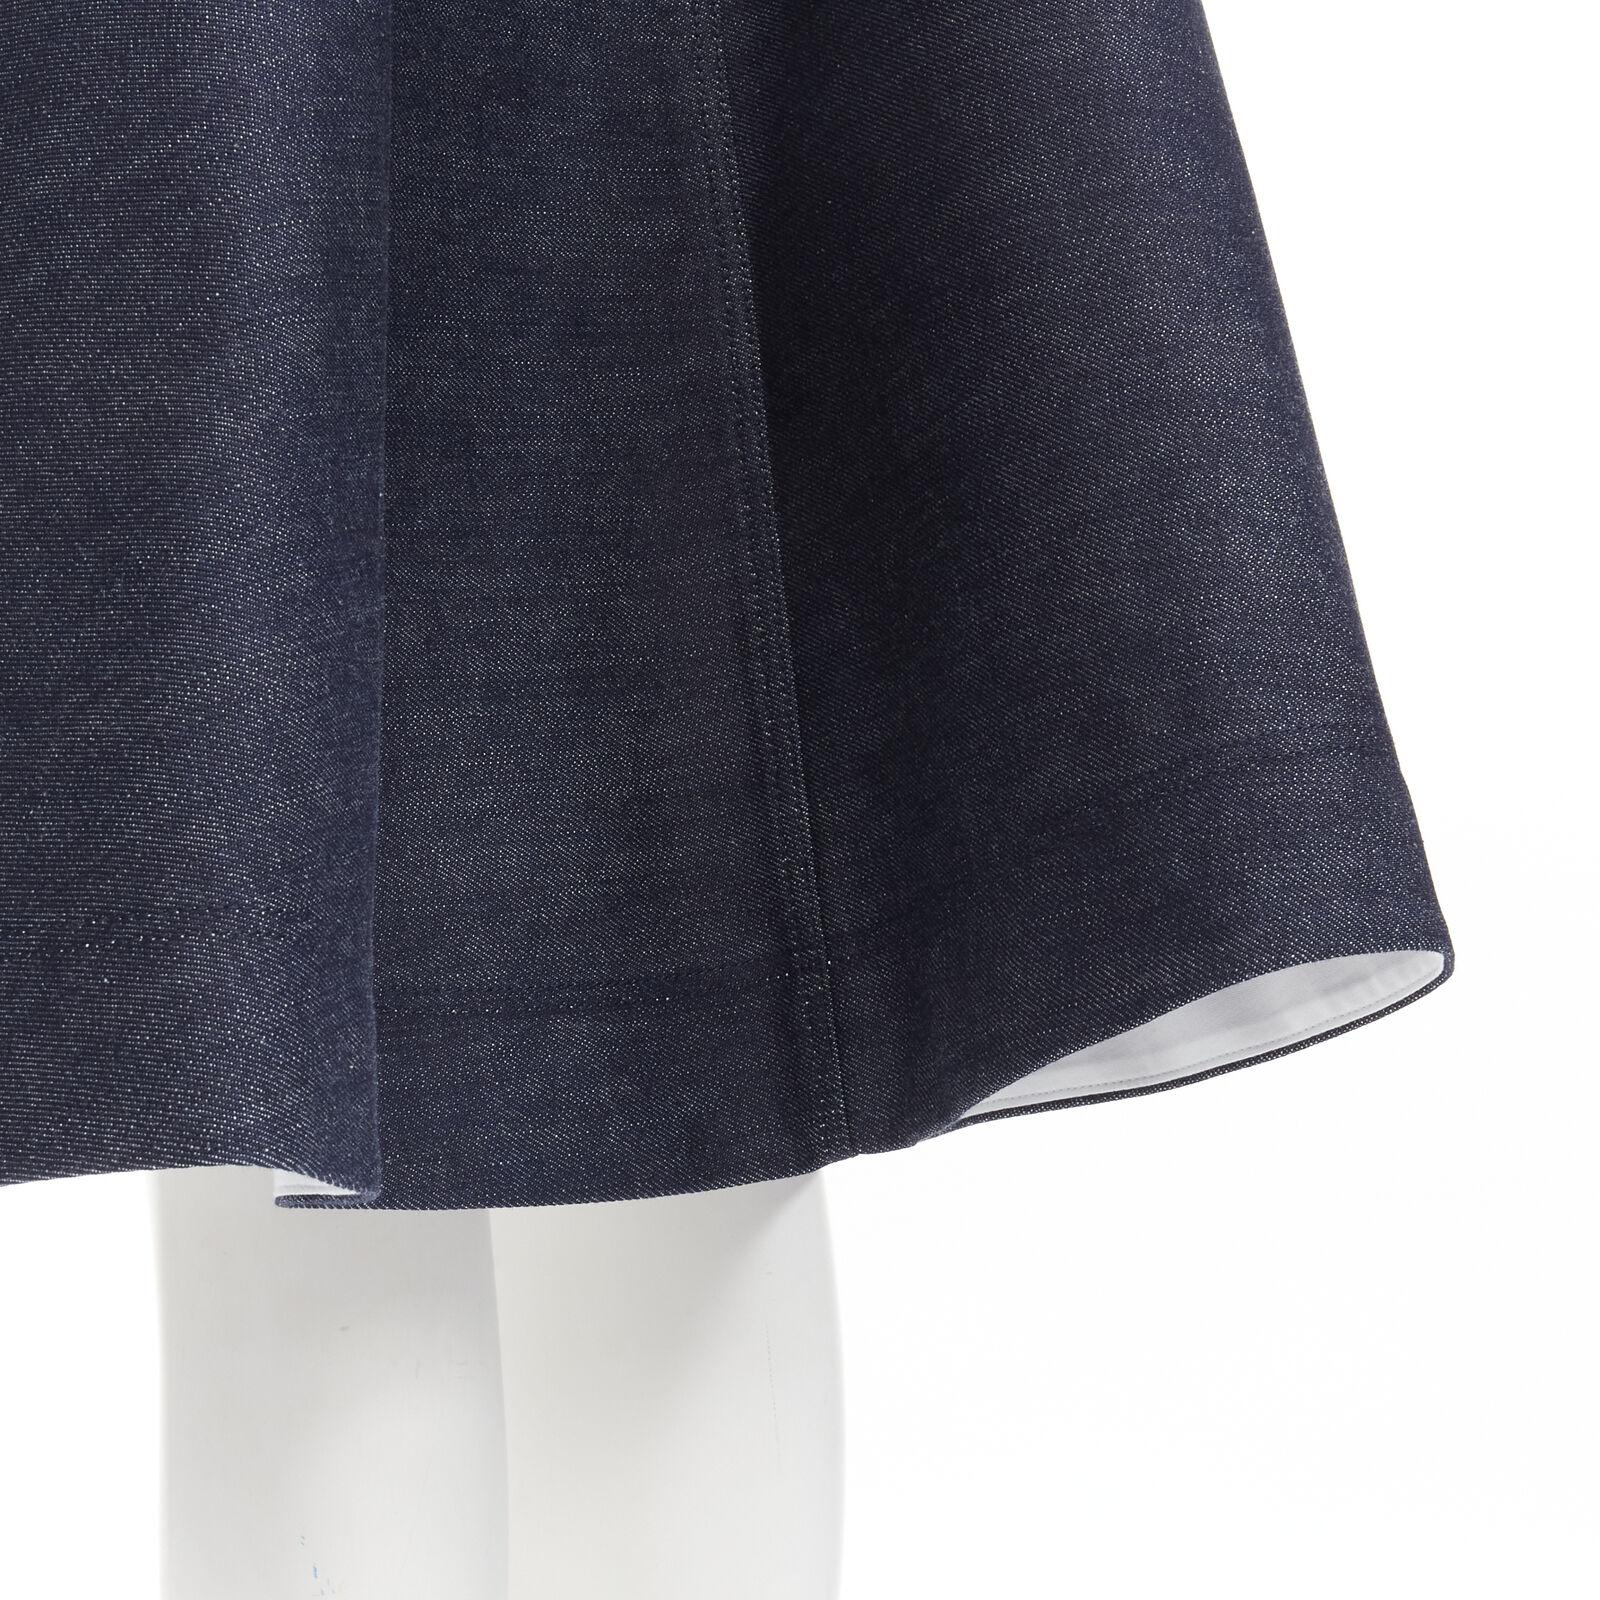 CALVIN KLEIN 205W39NYC navy minimal structural A-line denim flared skirt US2 S
Reference: AAWC/A00331
Brand: Calvin Klein
Designer: Raf Simons
Collection: 205W39NYC
Material: Cotton
Color: Blue
Pattern: Solid
Closure: Zip
Lining: Partially